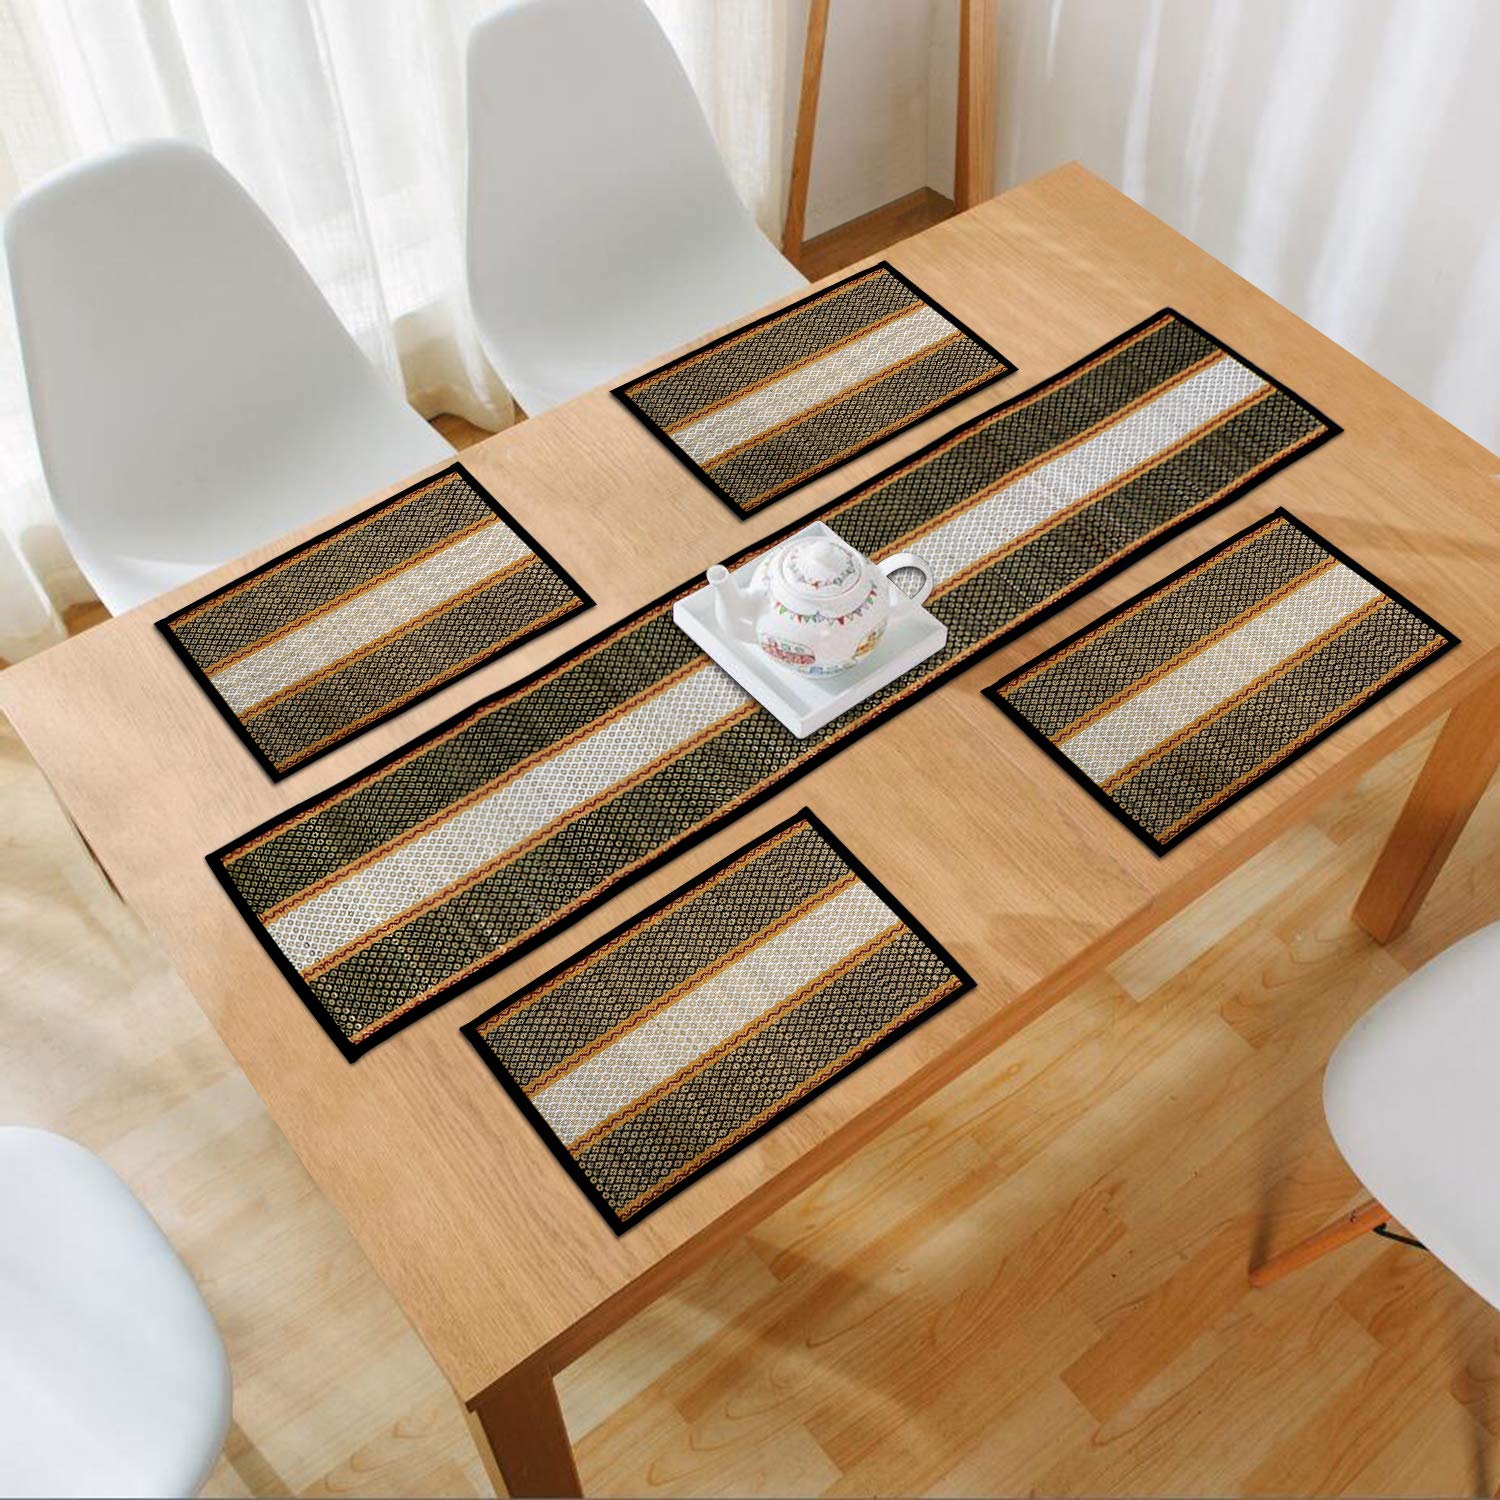 HOKIPO® Natural Handcrafted MadurKathi Table Mats & Runners 4 Seater, Black - Set of 4